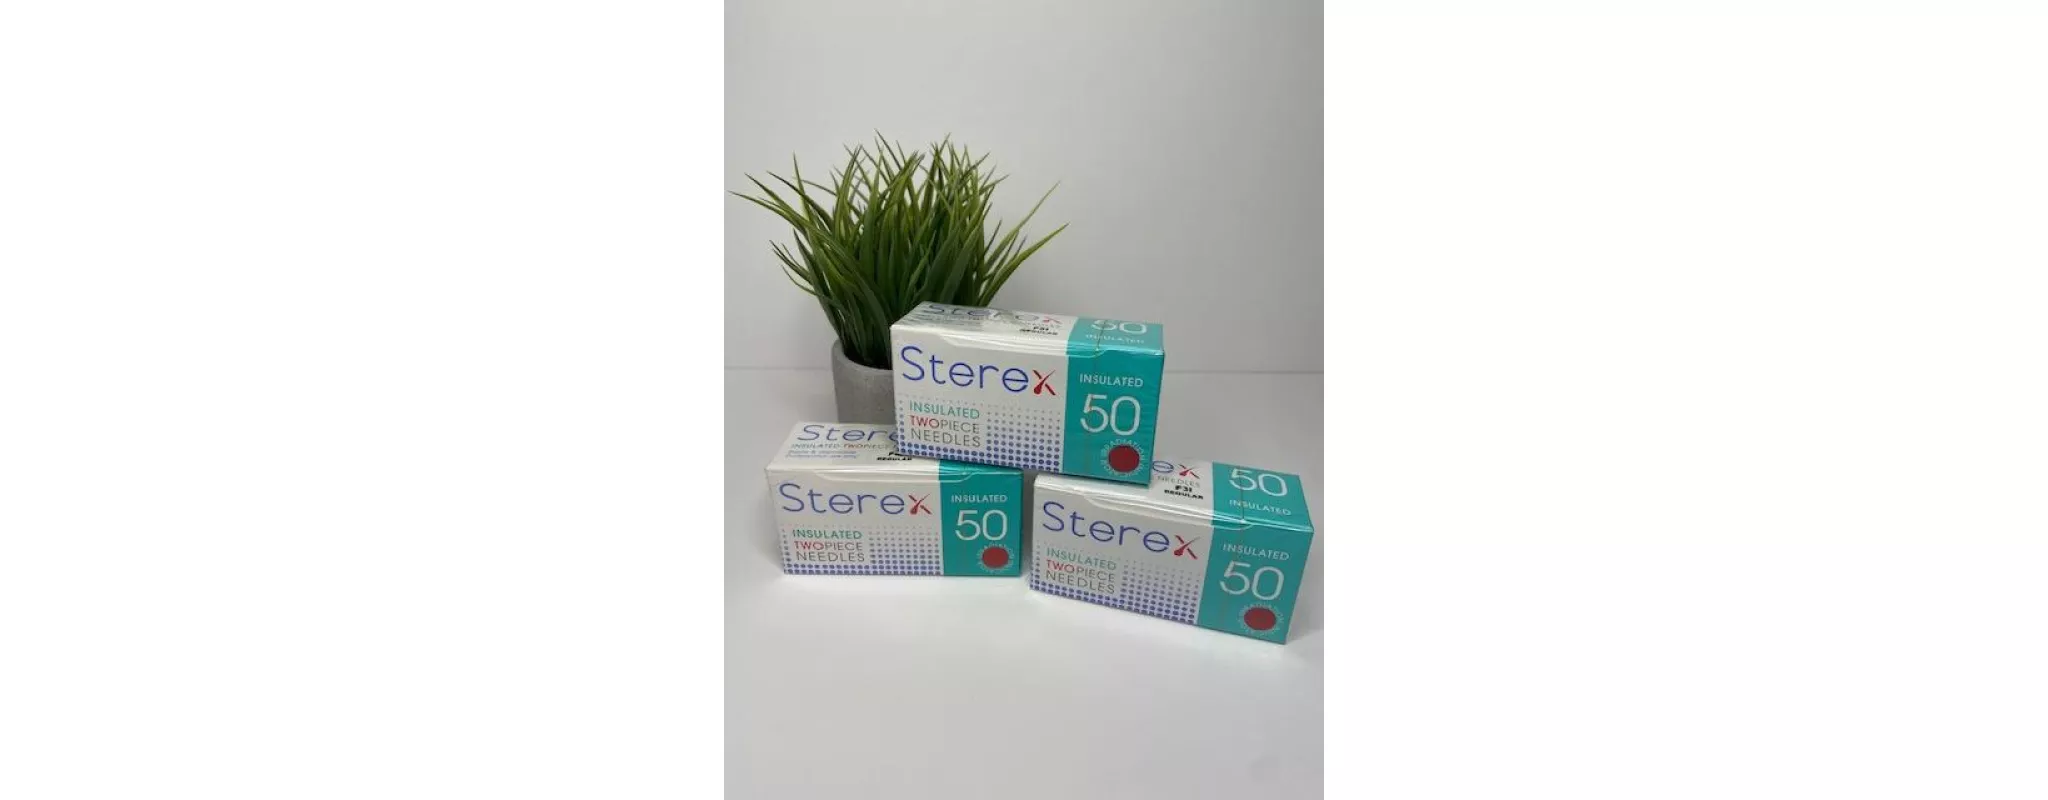 Sterex 2 piece Insulated needles in a variety of sizes